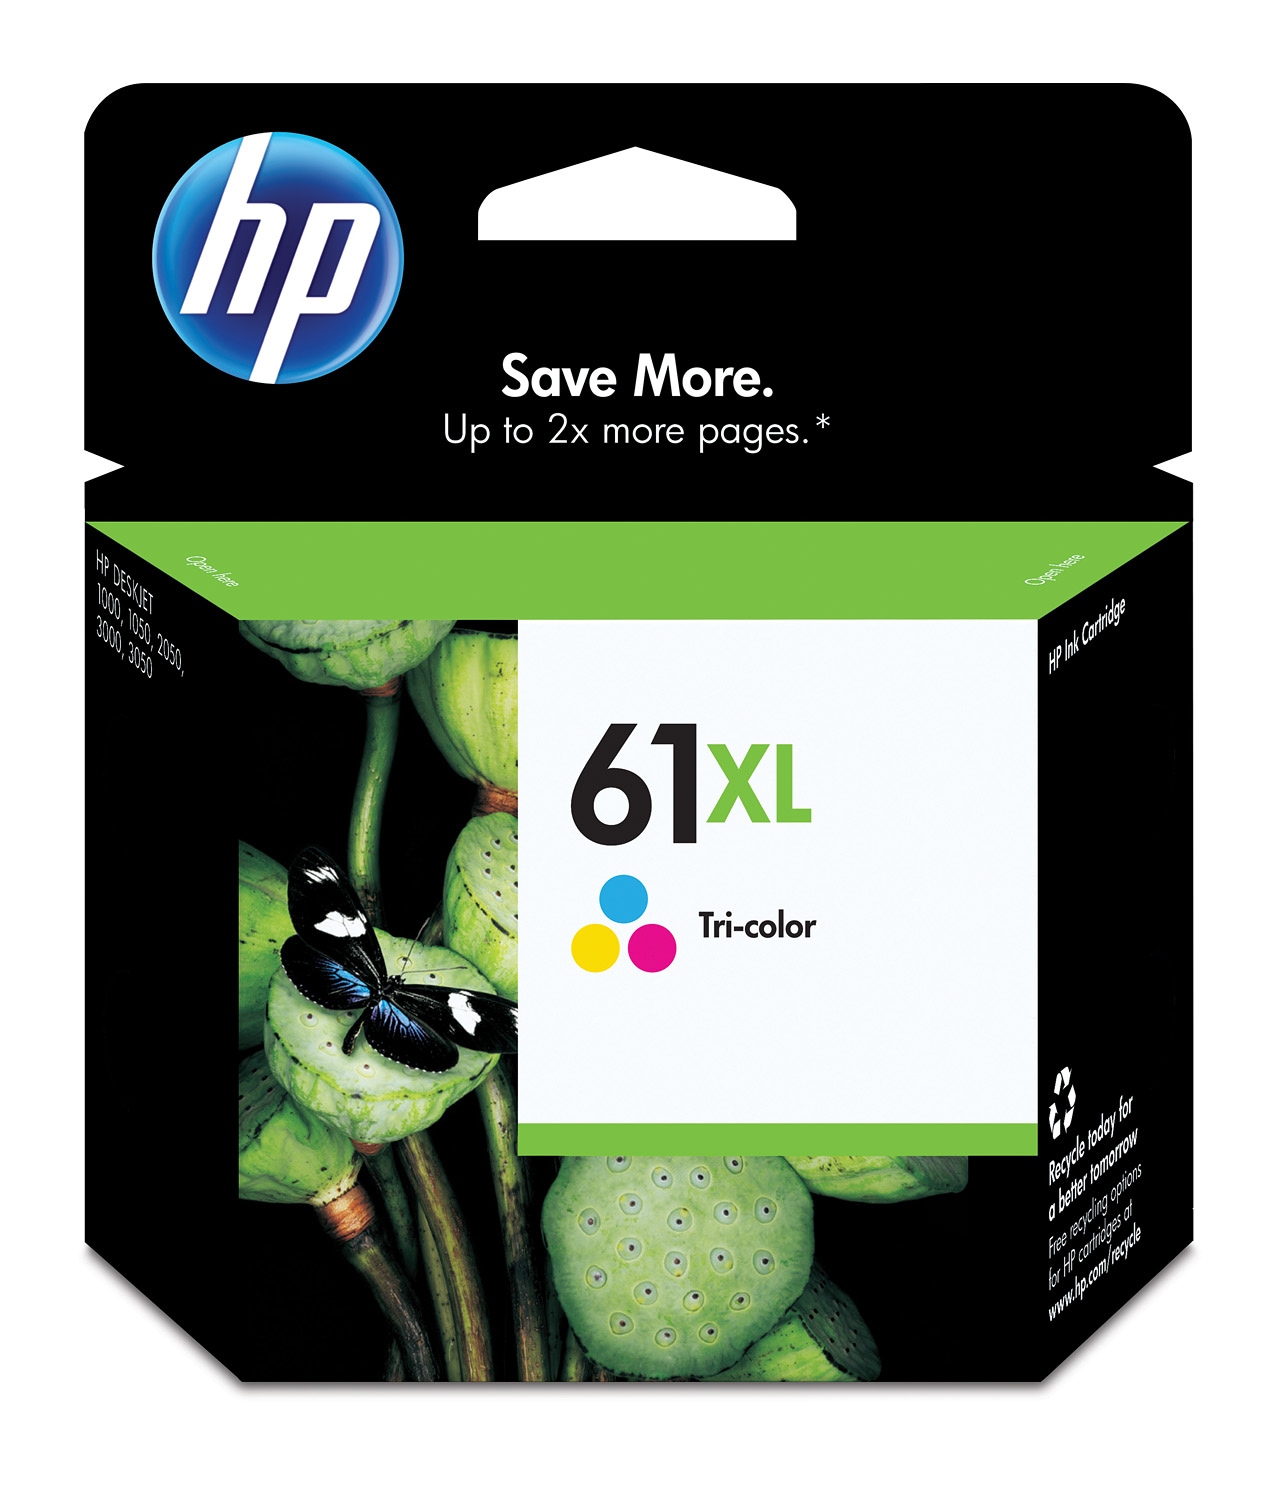 HP 61XL High Yield Tri-color Original Ink Cartridge, ~300 pages, CH564WN#140 - image 1 of 8